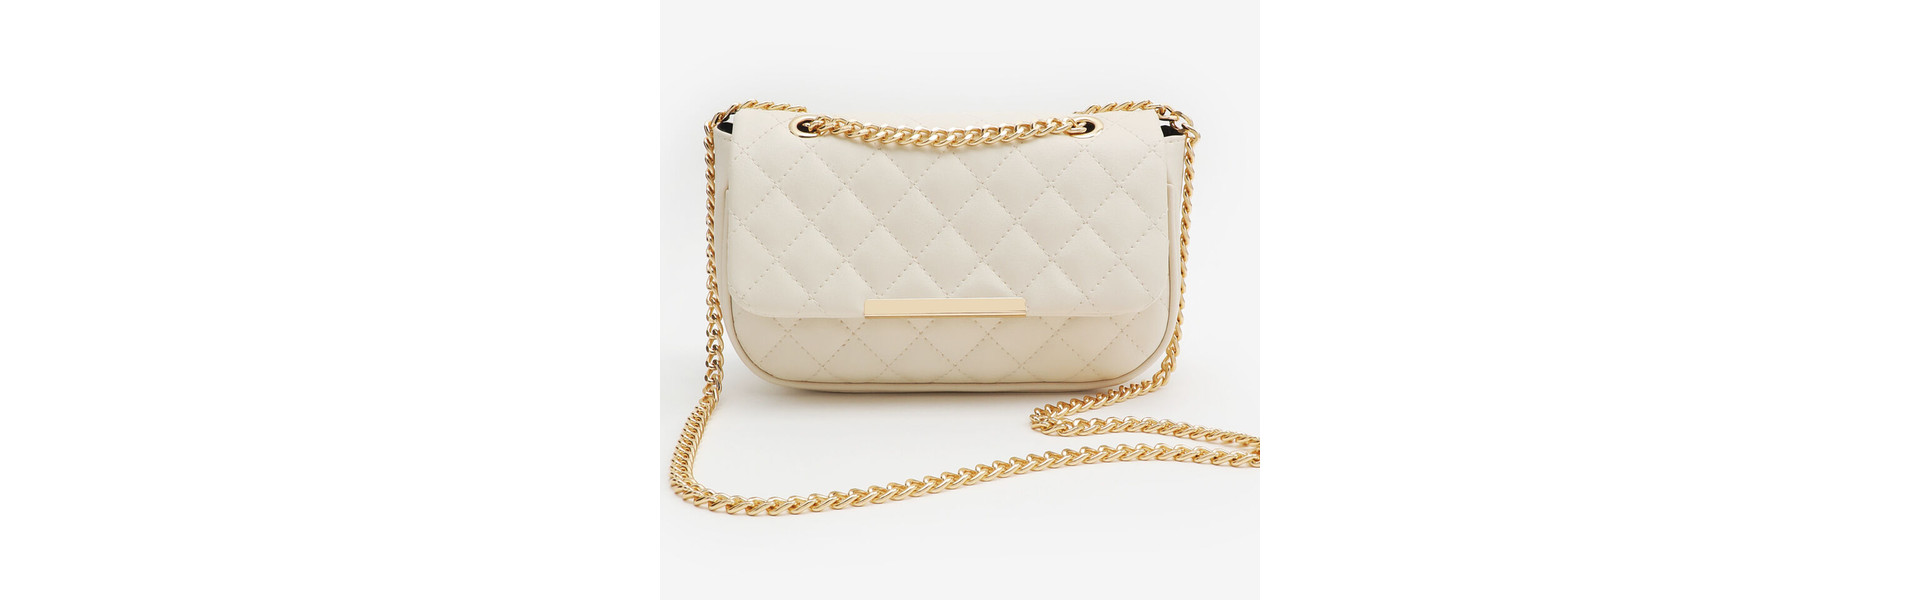 Quilted crossbody bag, $24.90 at Ardène 